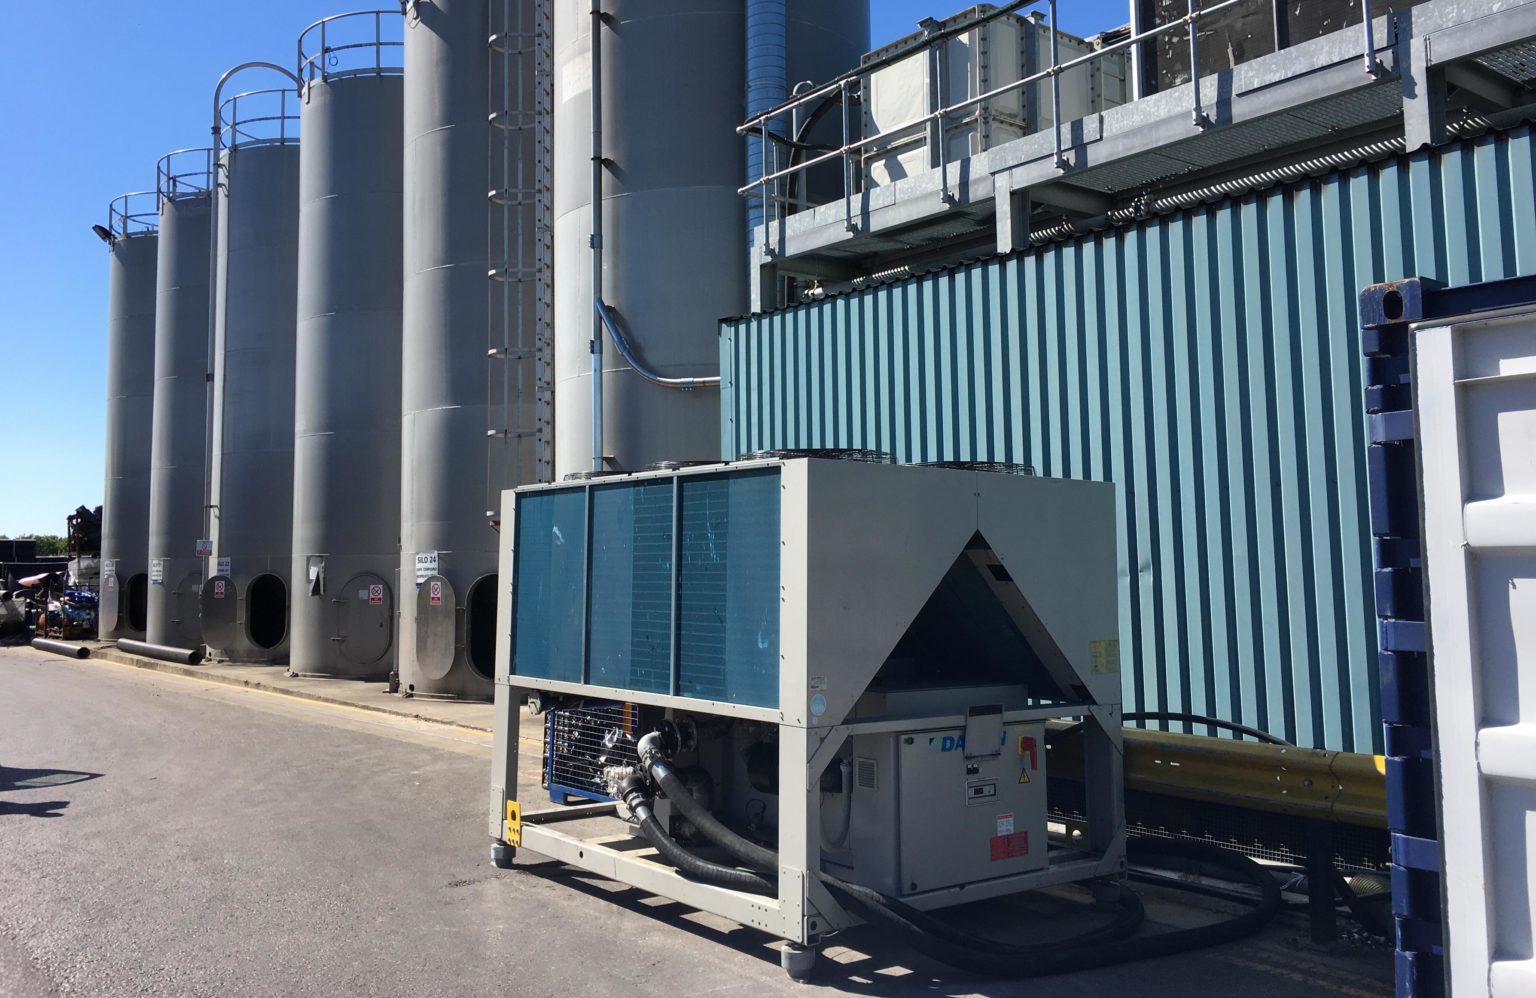 350kw process cooling hire. A process chiller installed at a plastic production plant